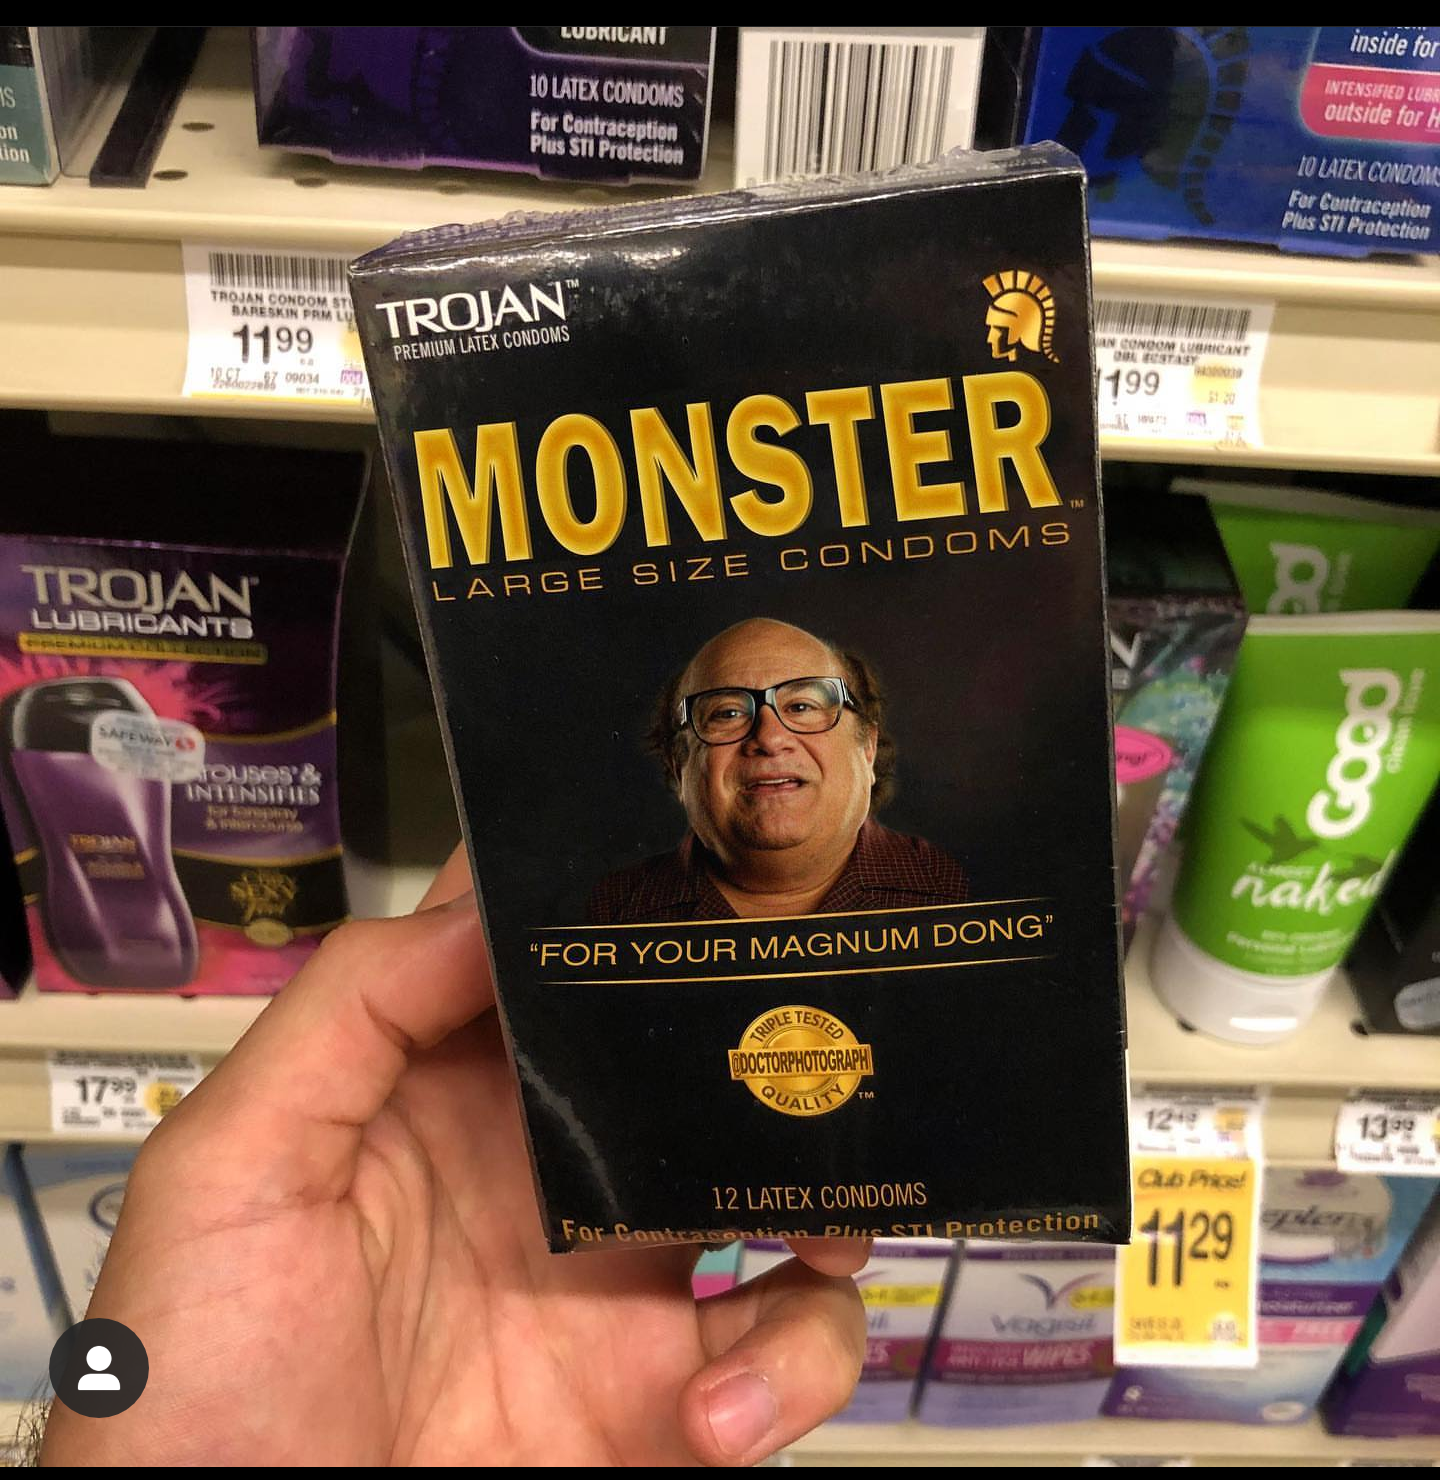 monster condom - Luorilani Alle for Lates Cordone fet Pure Lation For C Ps 1199 Trojan Penulis Monster Trojan Large Size Condoms Sves naked For Your Magnum Dong Doctorat 17 13 12 Latex Condoms Traction 4400